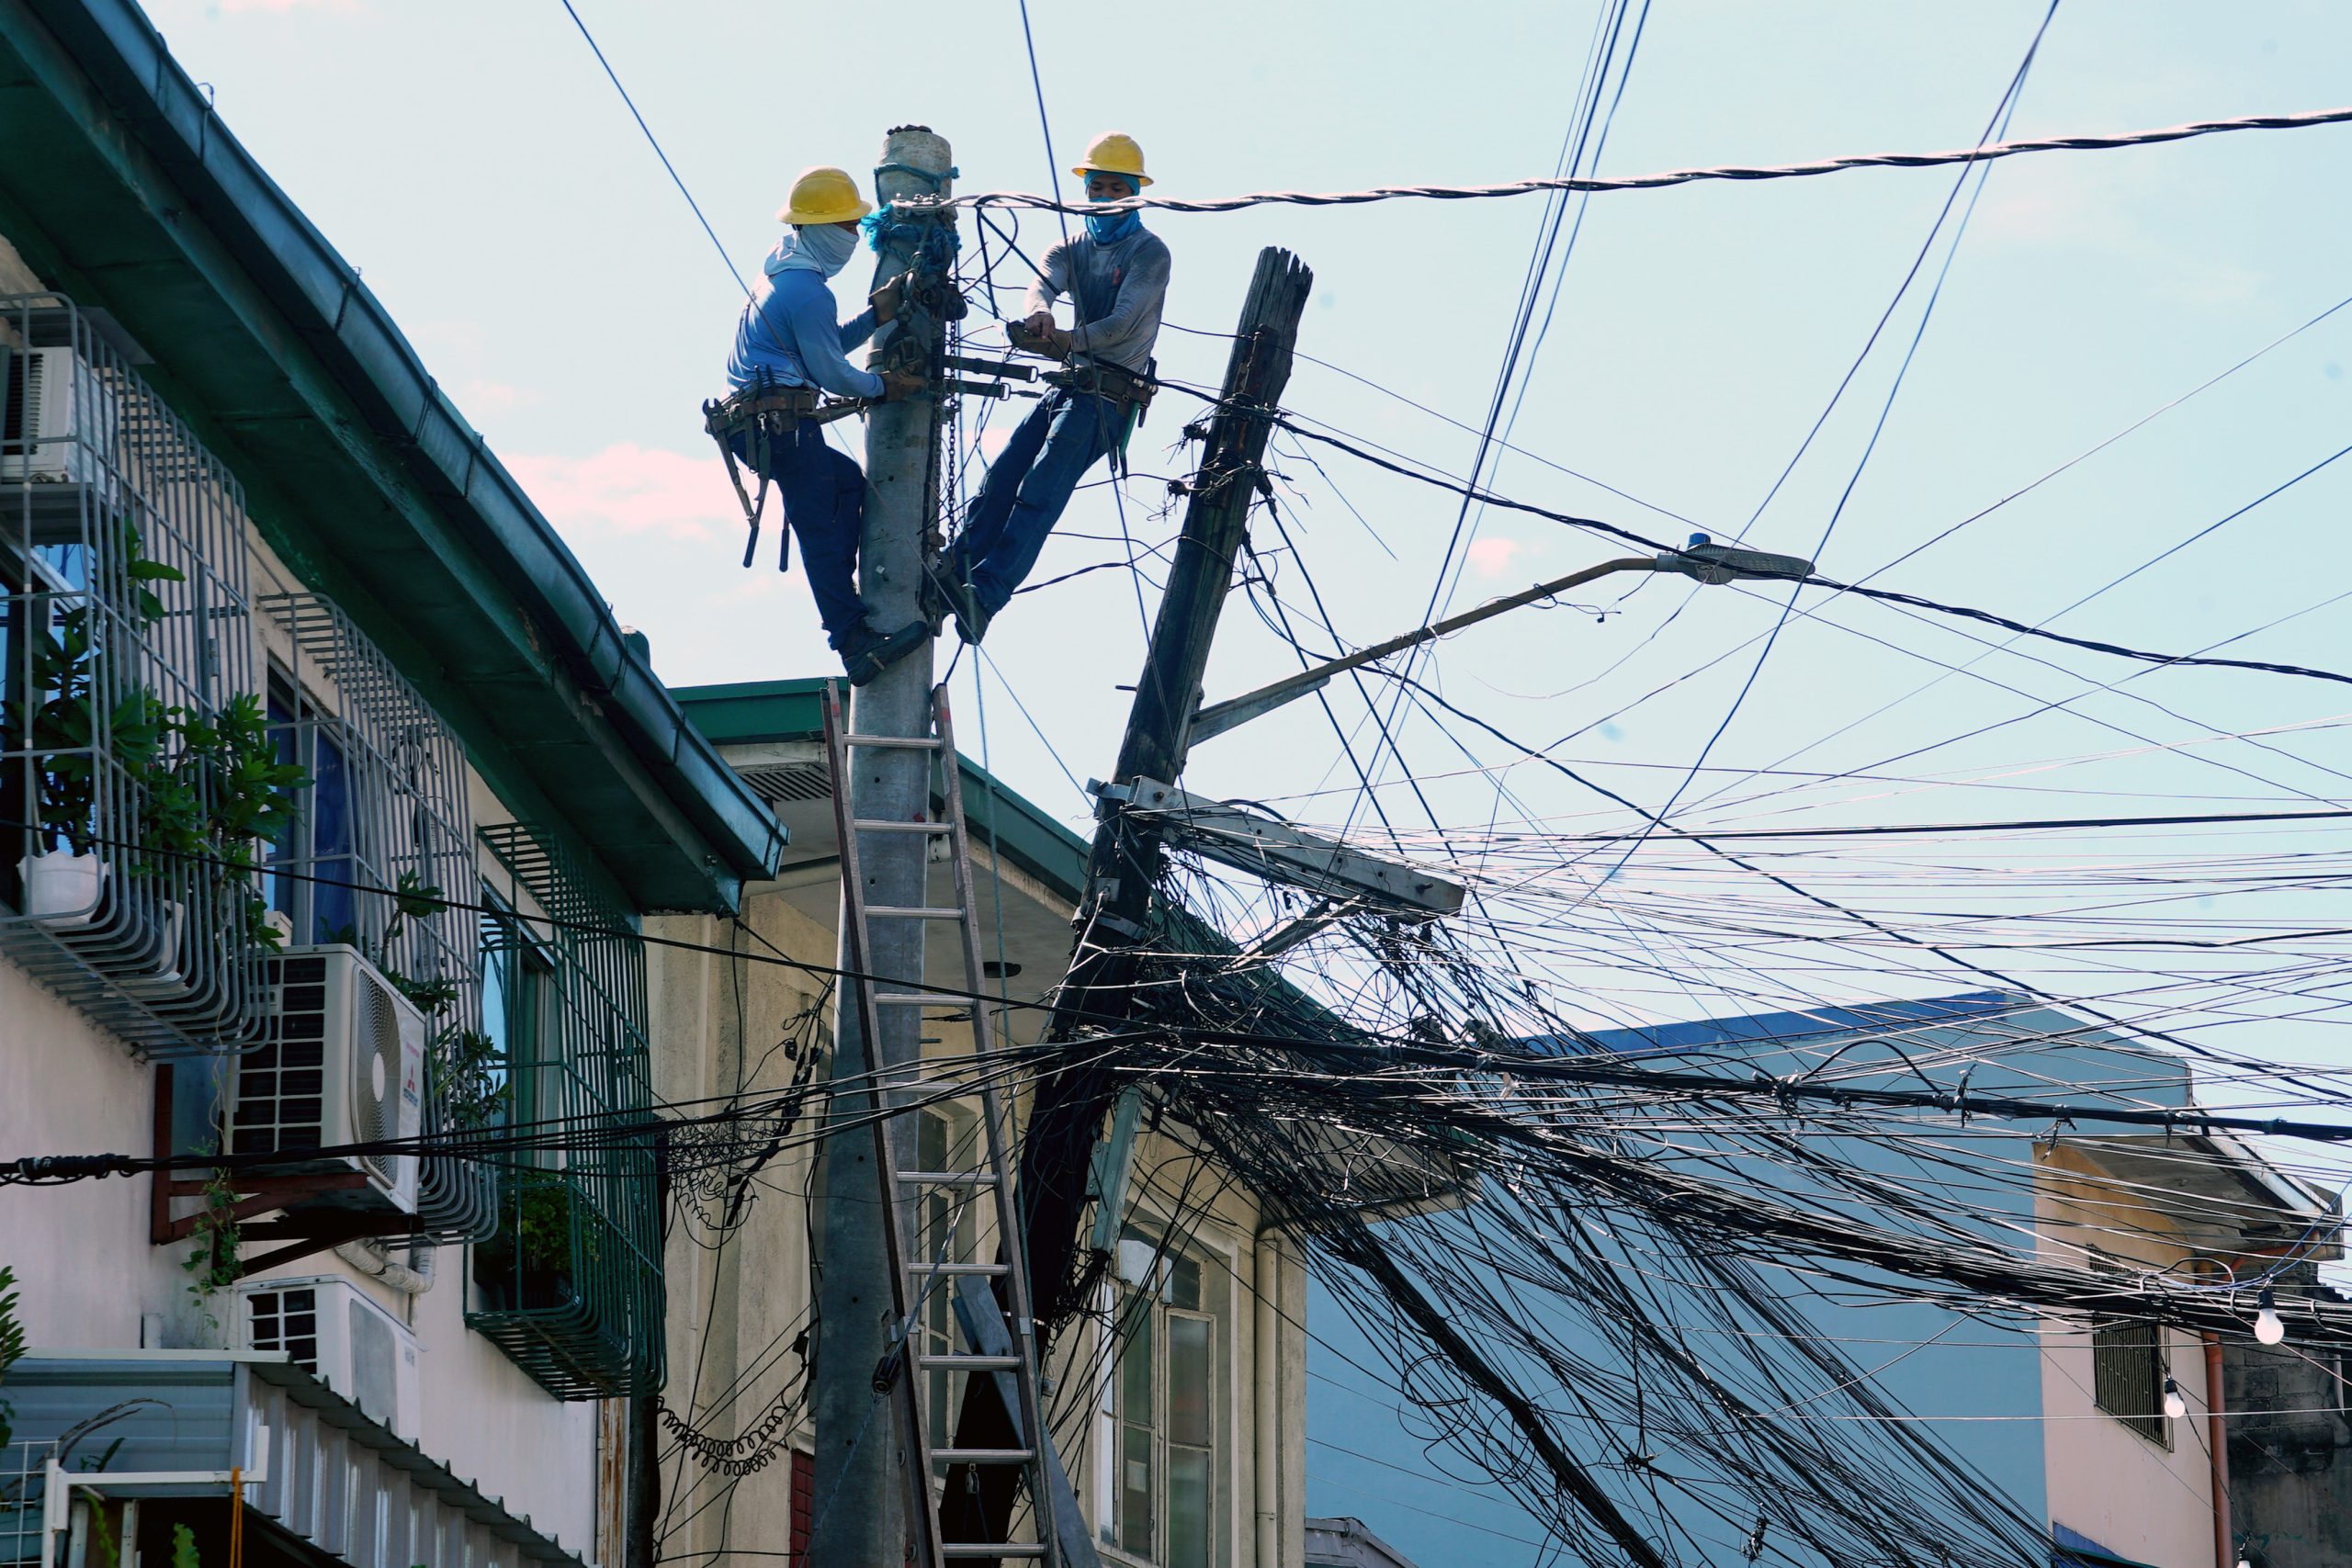 Two linemen disentangle and transfer the wires to a concrete power pole from the leaning power pole